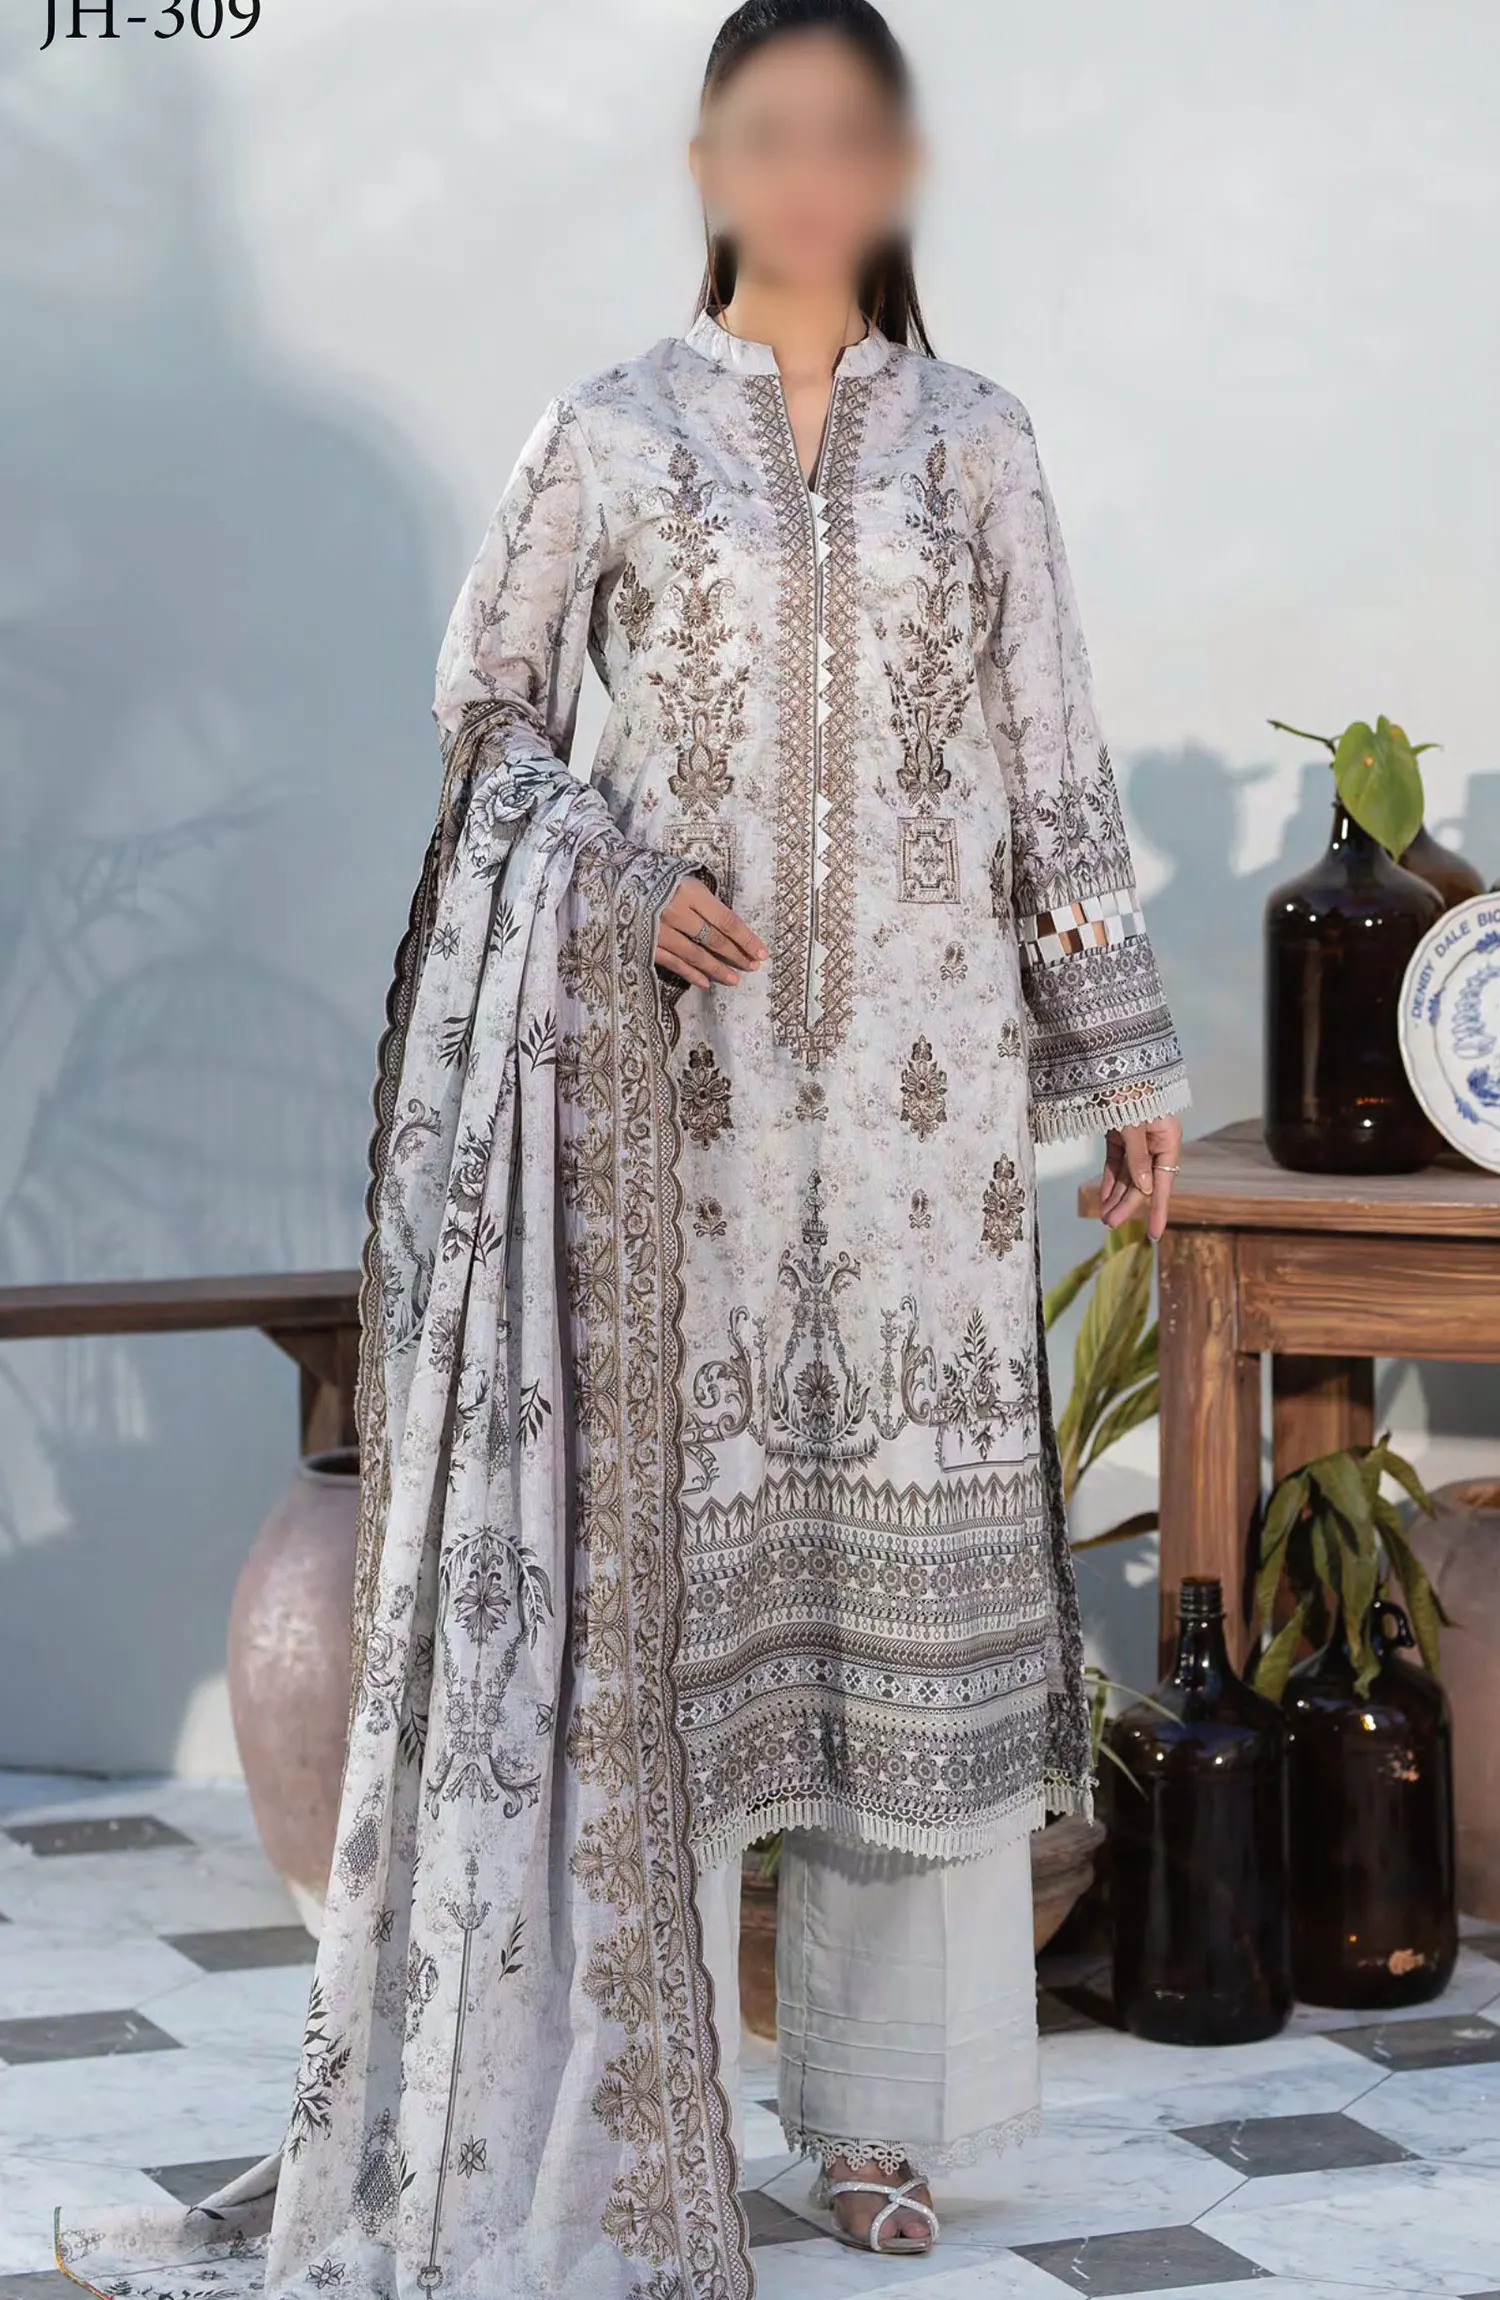 Johra Parwaaz Embroidered Printed Lawn Collection 2024 - JH 309